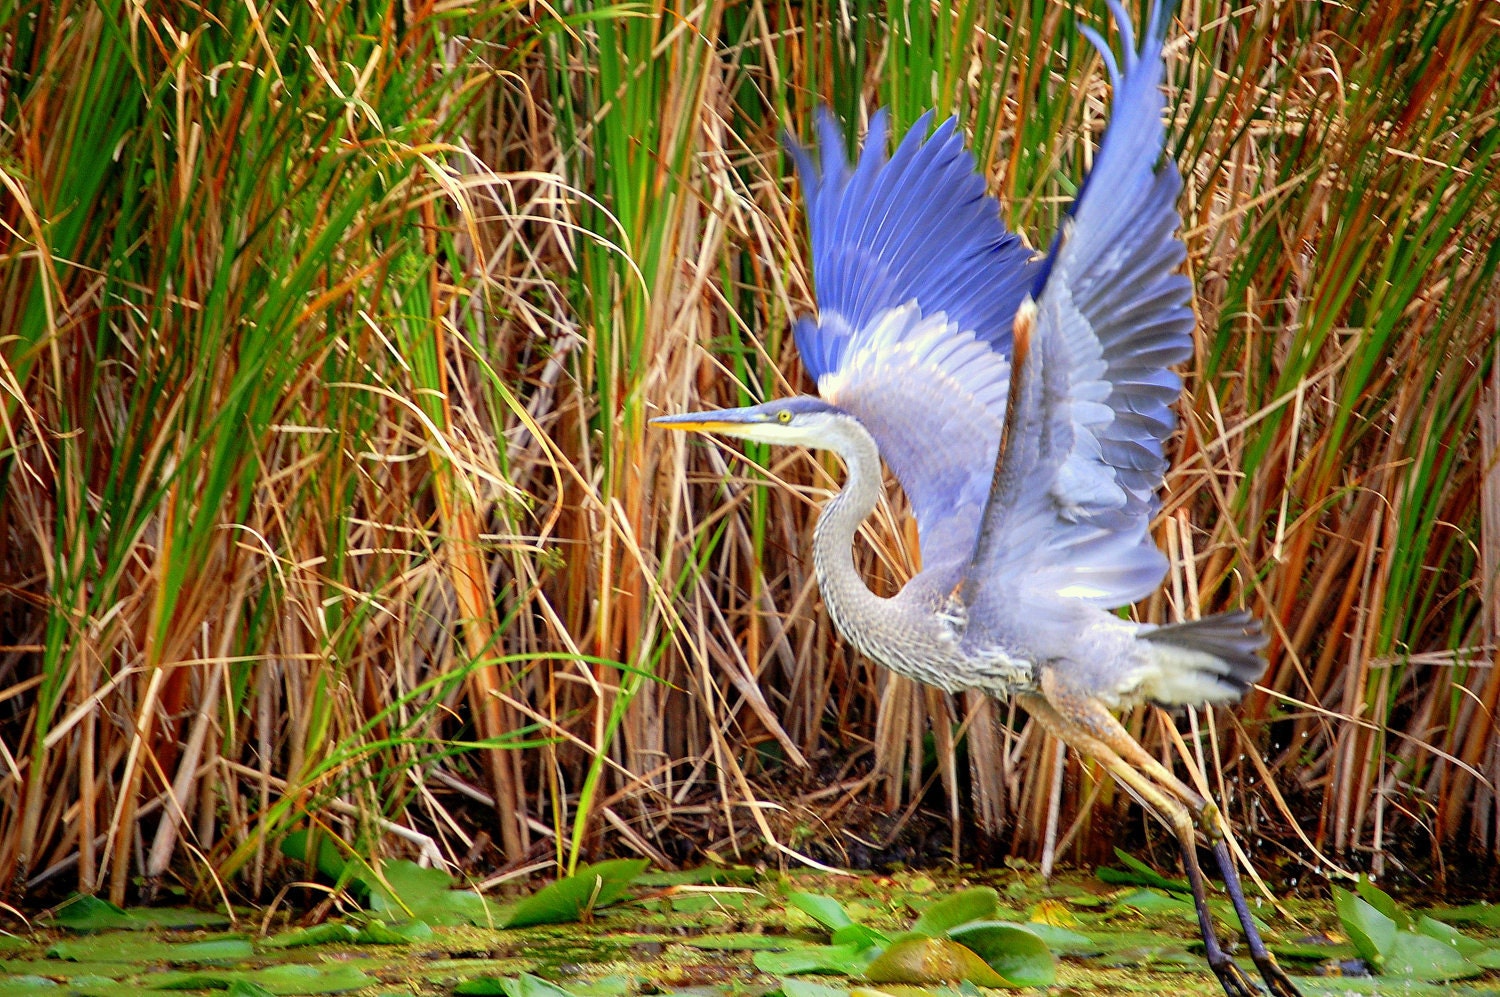 Great Blue Heron 16x20 Giclee Canvas Gallery Wrap Floating Frame Print Nature Photography, Fine art, Home Decor Office Decor - LindaRaeImages